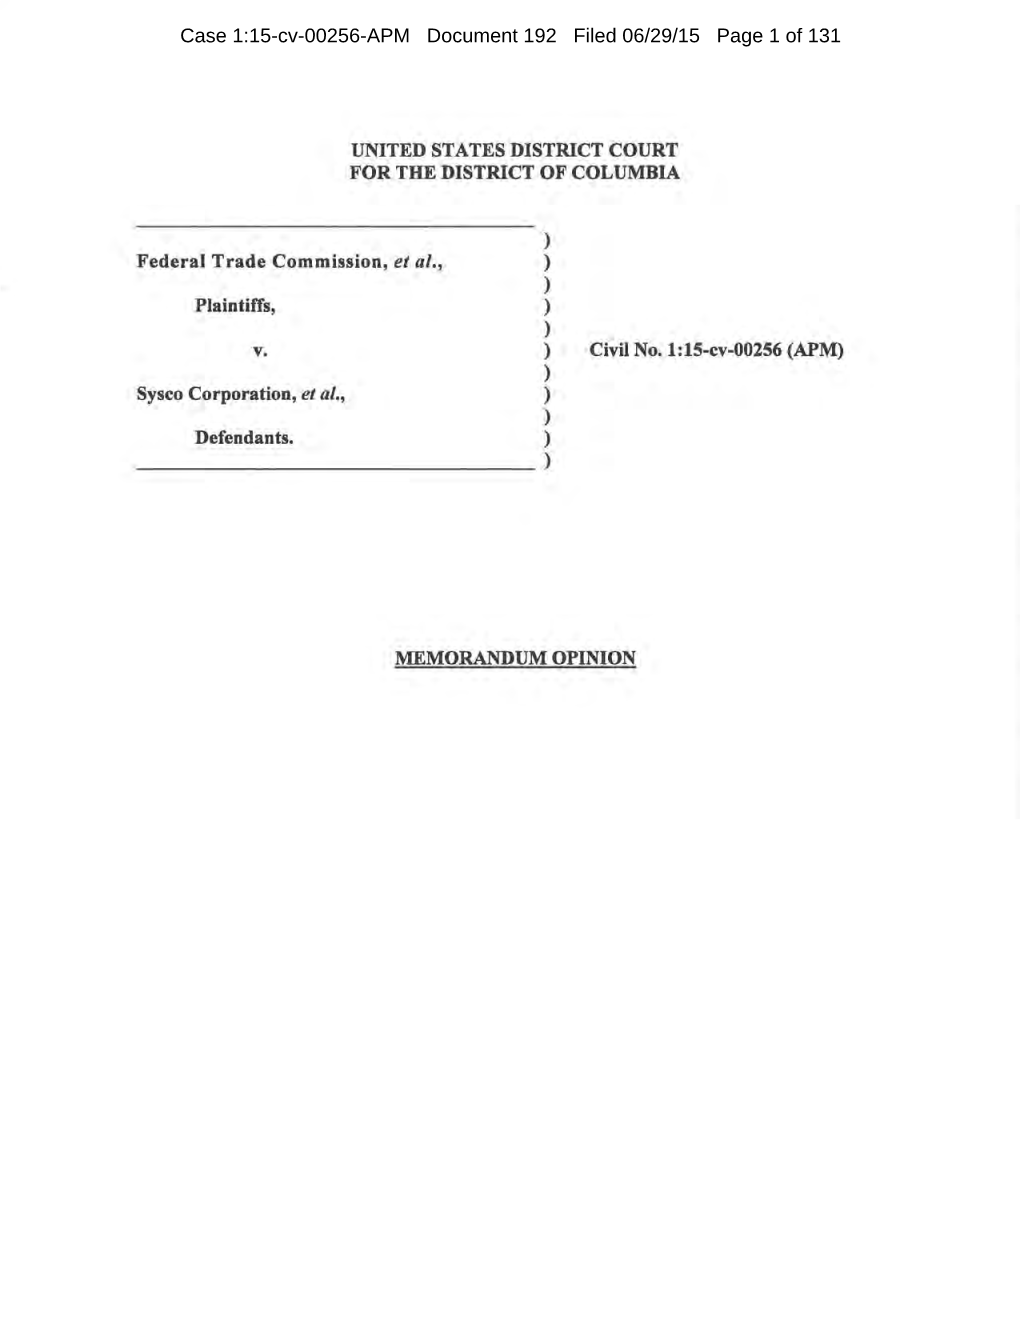 Case 1:15-Cv-00256-APM Document 192 Filed 06/29/15 Page 1 of 131